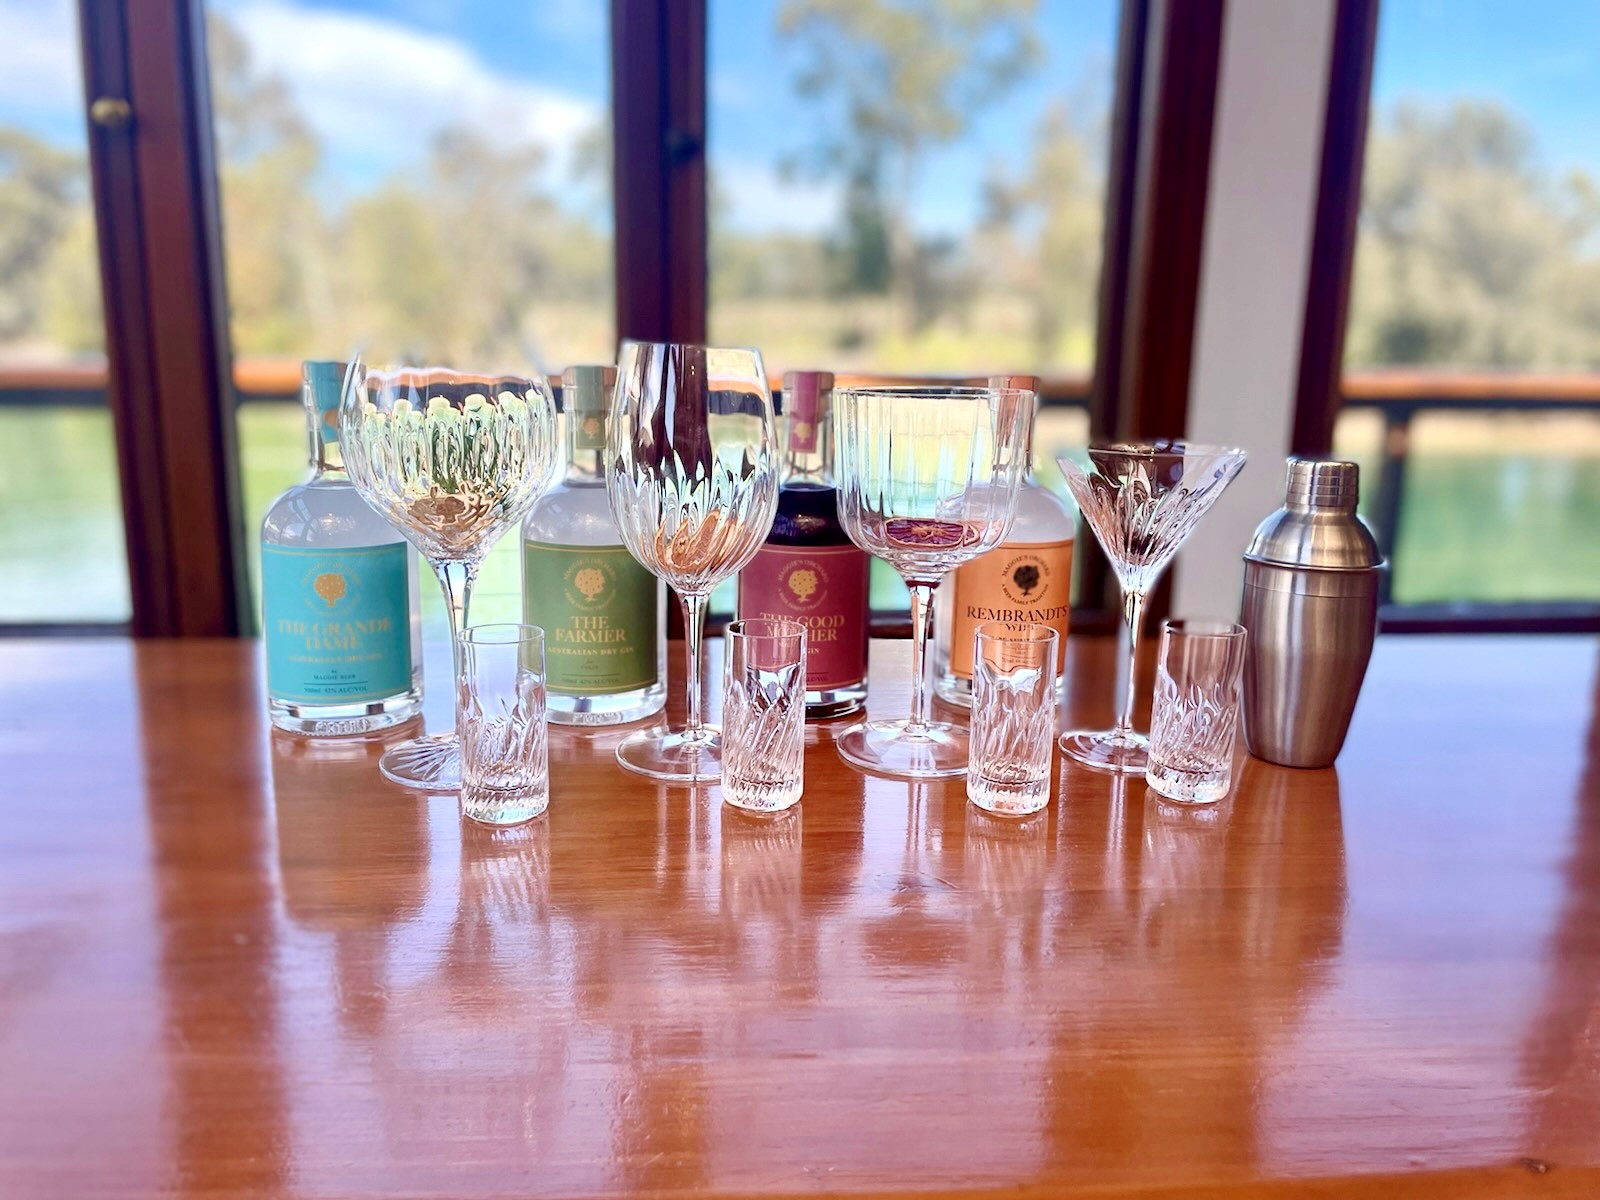 Maggie Beer’s Farmshop  - Cocktail Making Experience 